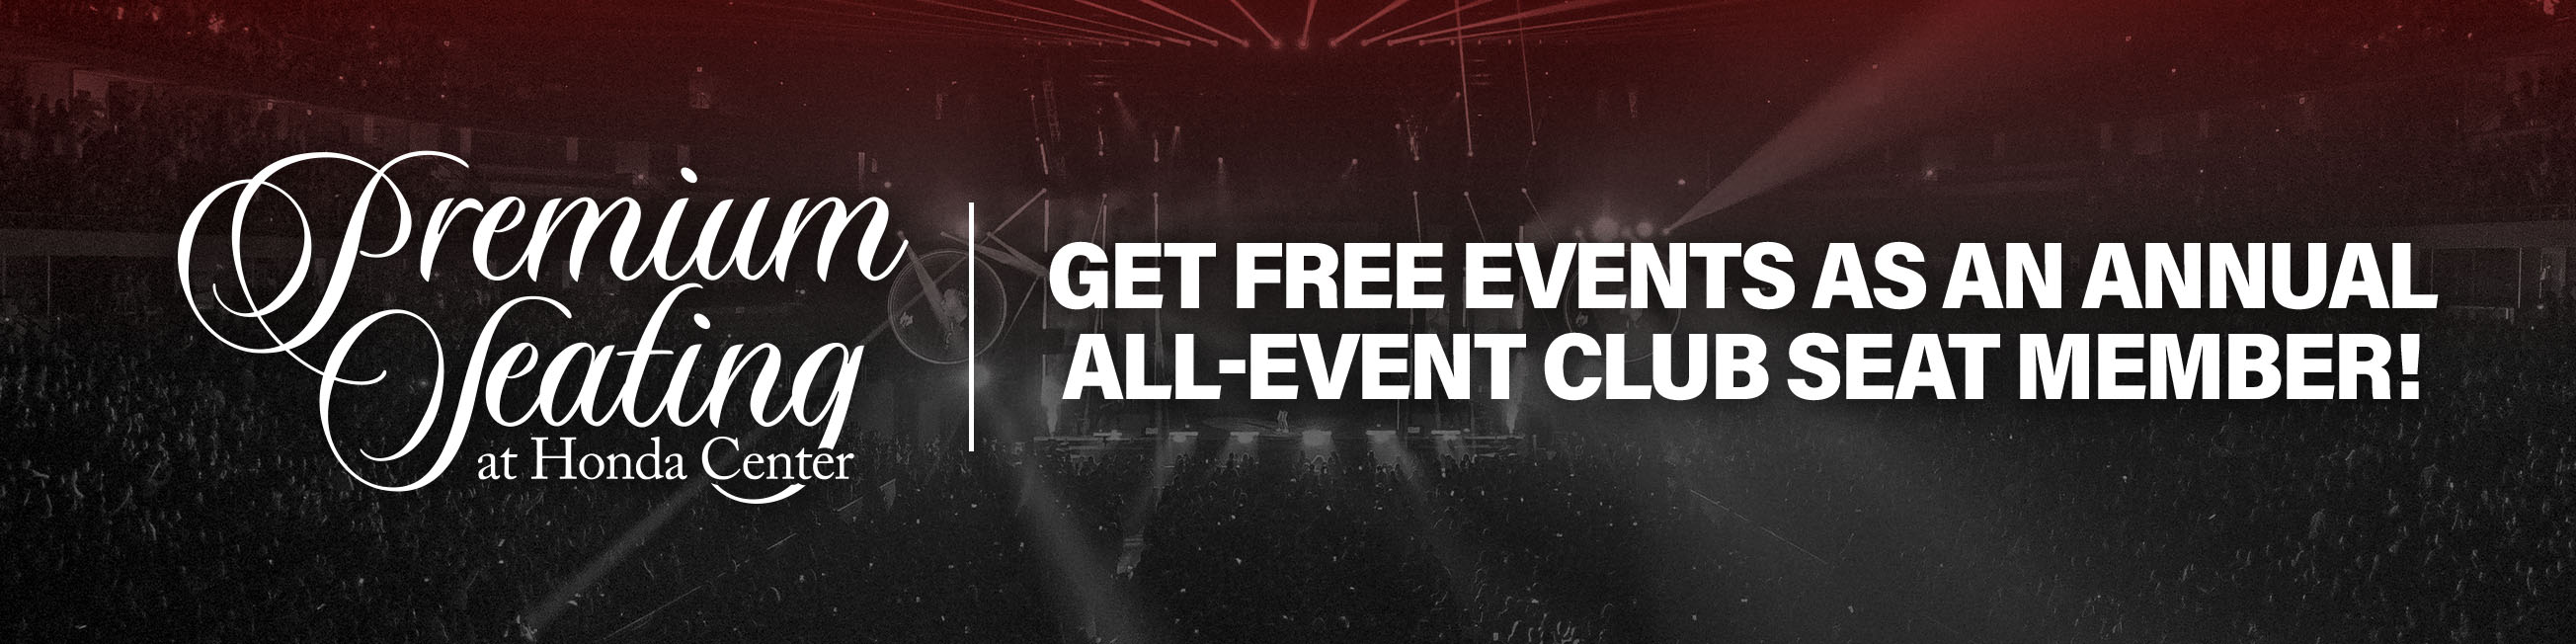 Premium Seating at Honda Center: become an All-Event Club Seat Member, get select events for free!